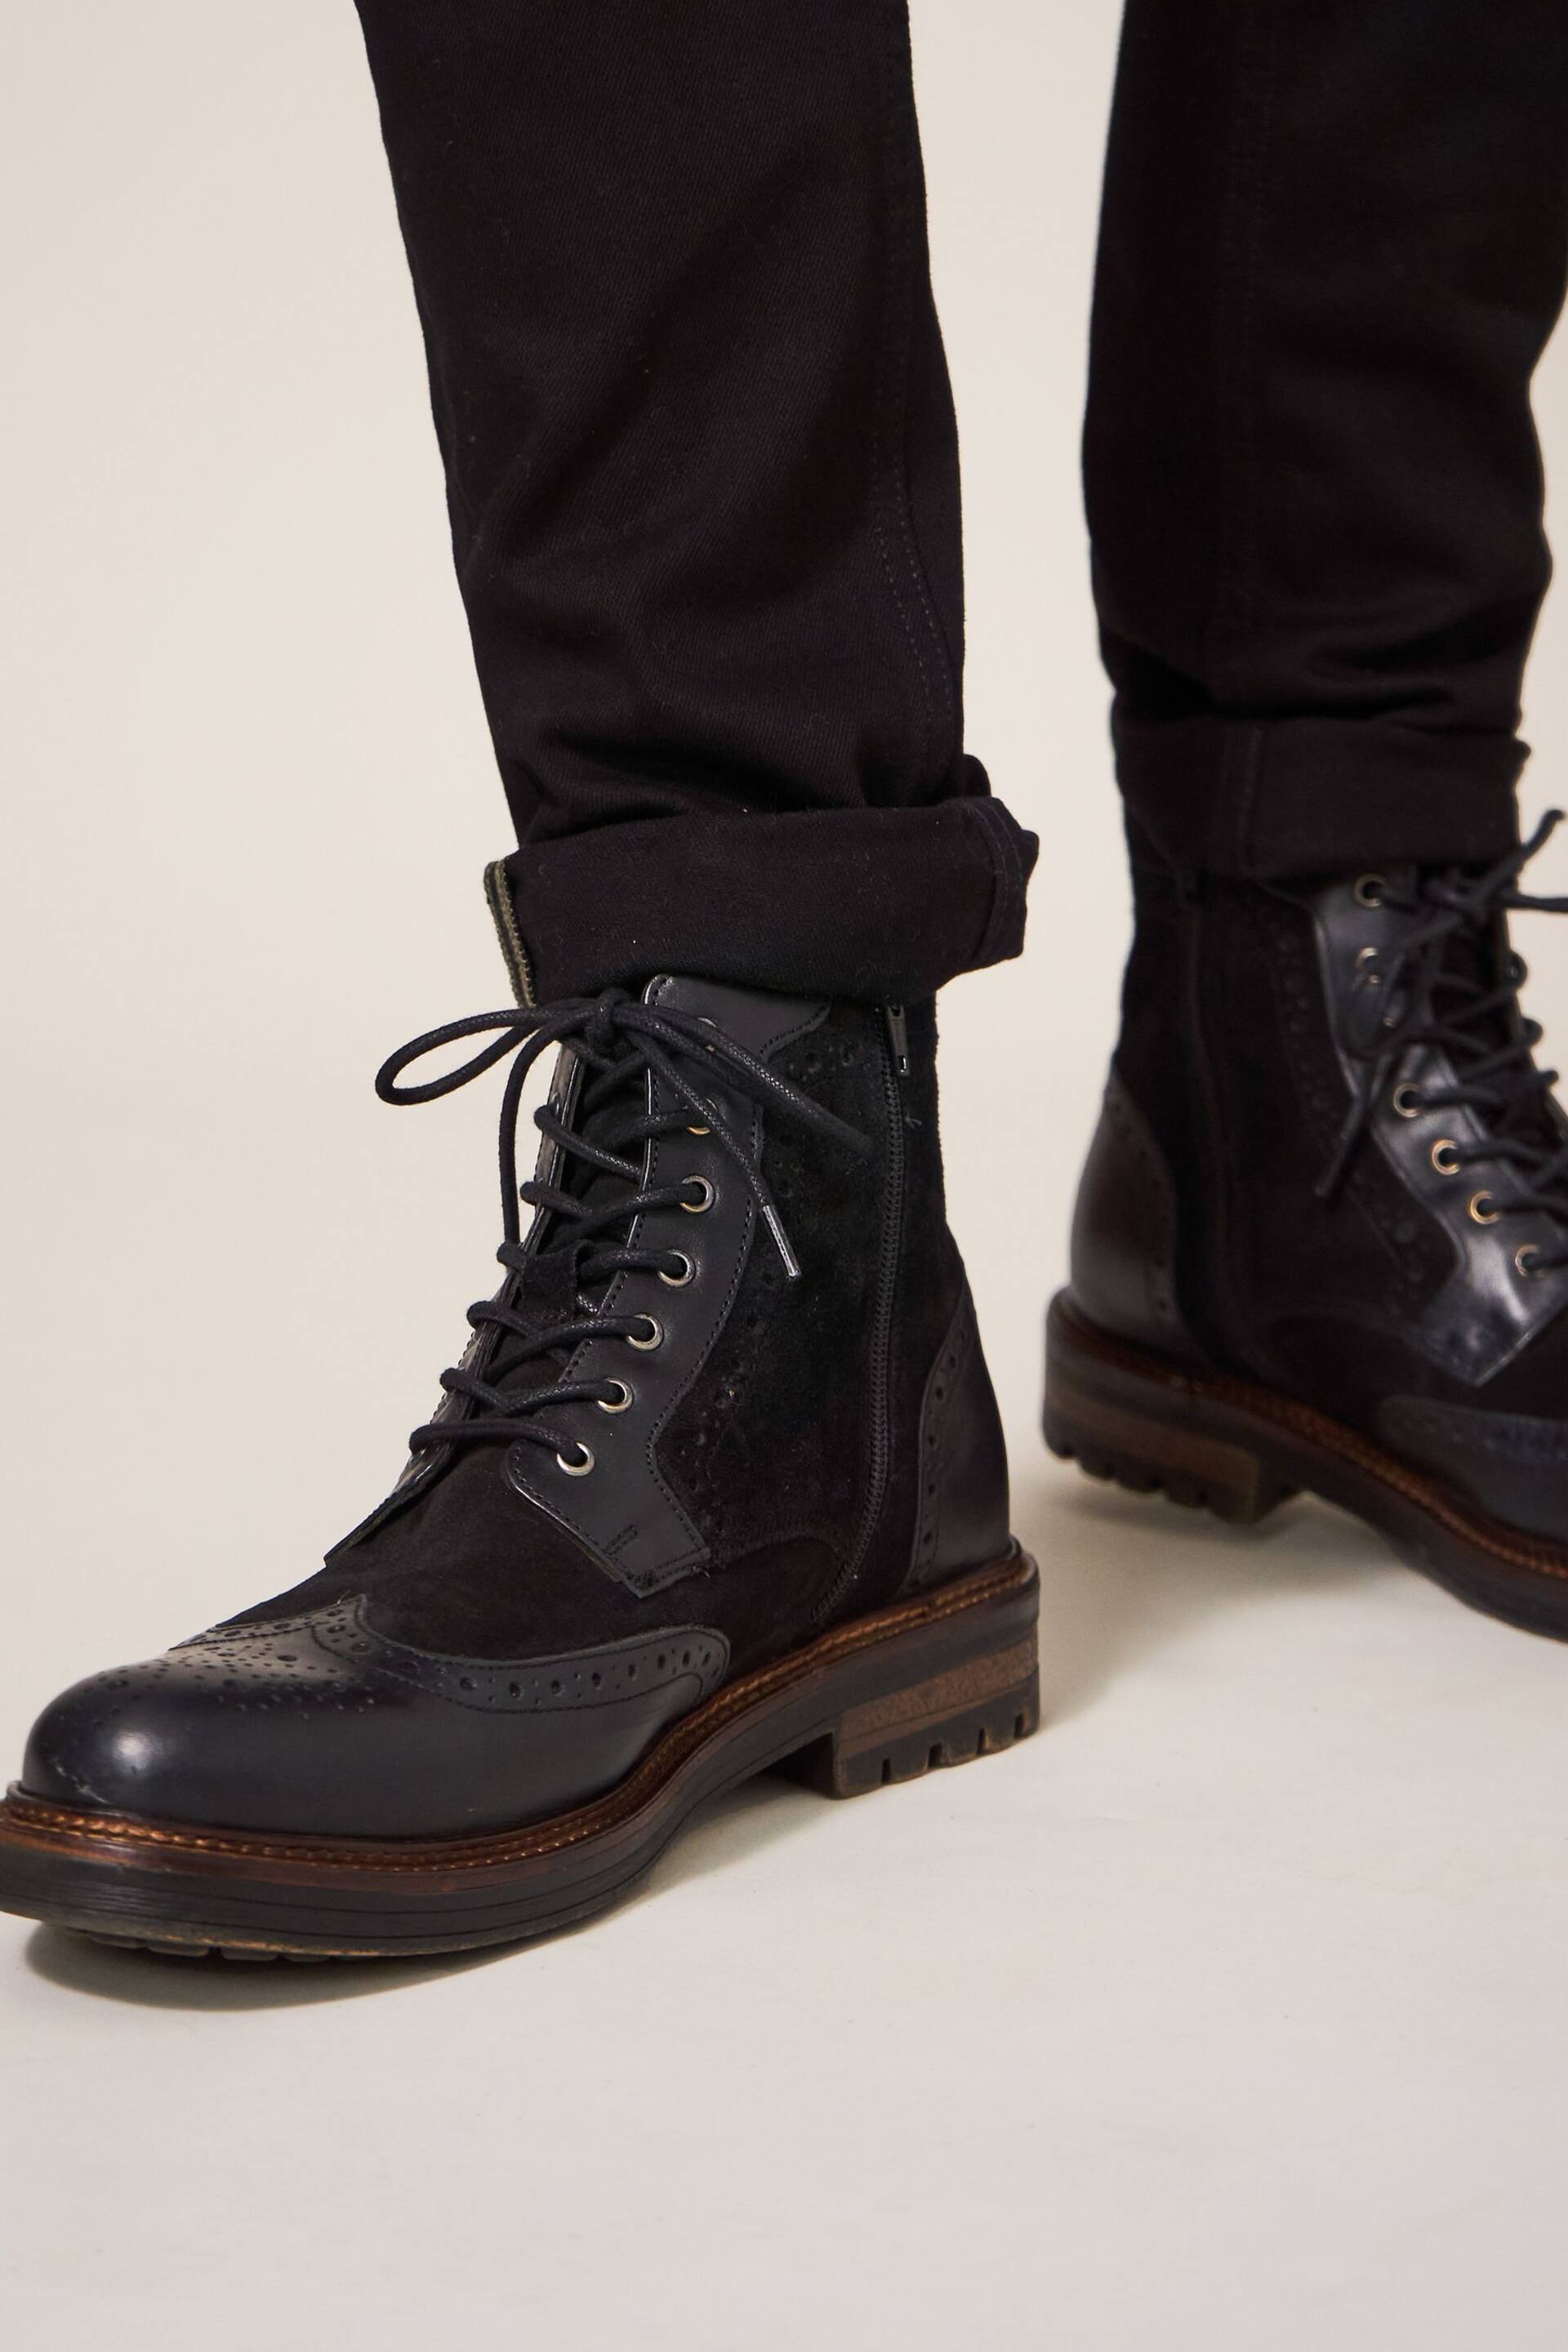 White Stuff Black Brogue Leather Lace-Up Boots - Image 4 of 5